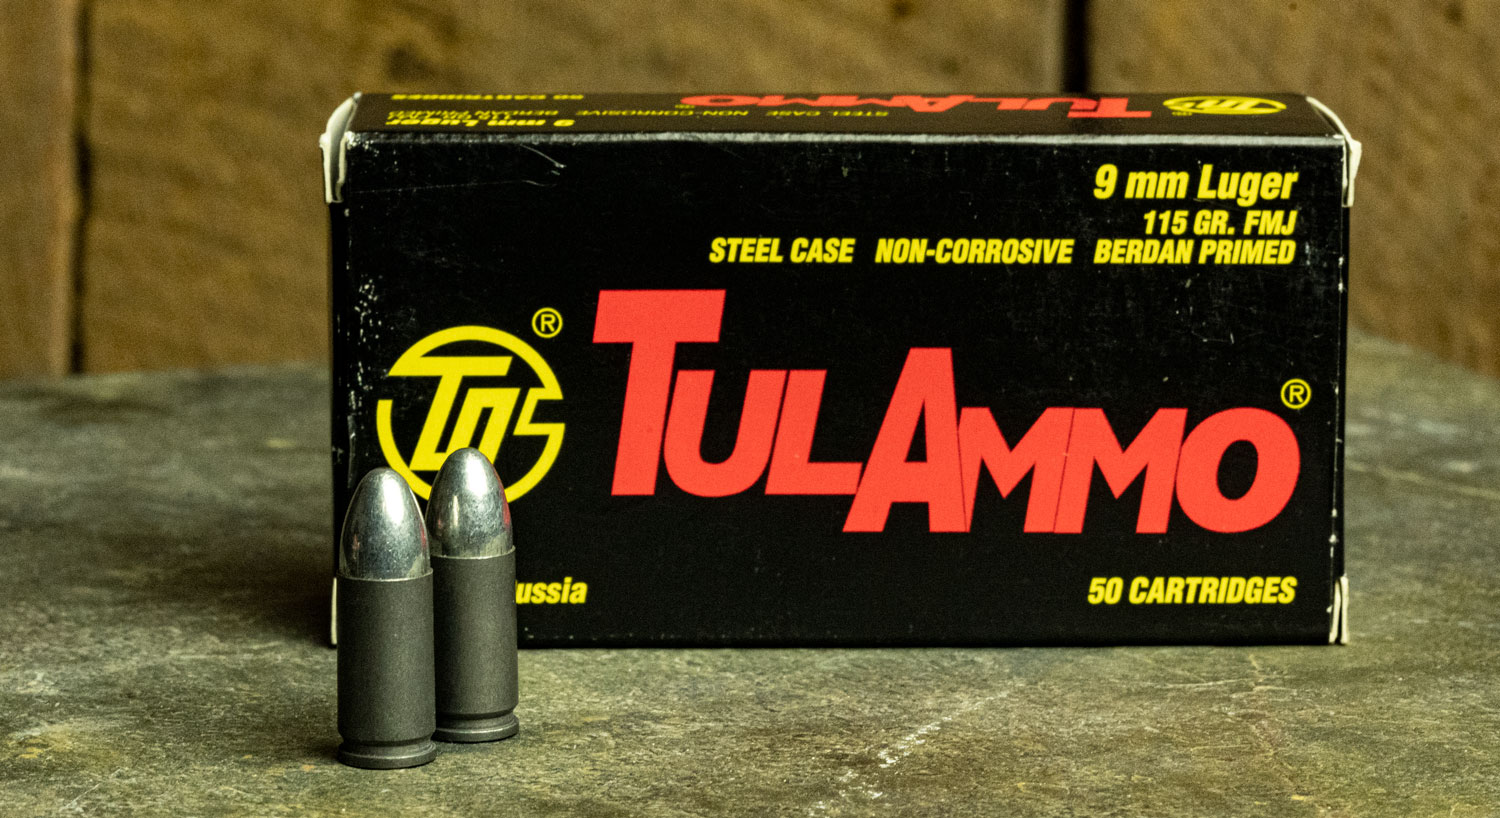 Tula ammo loaded with bullets made from zinc